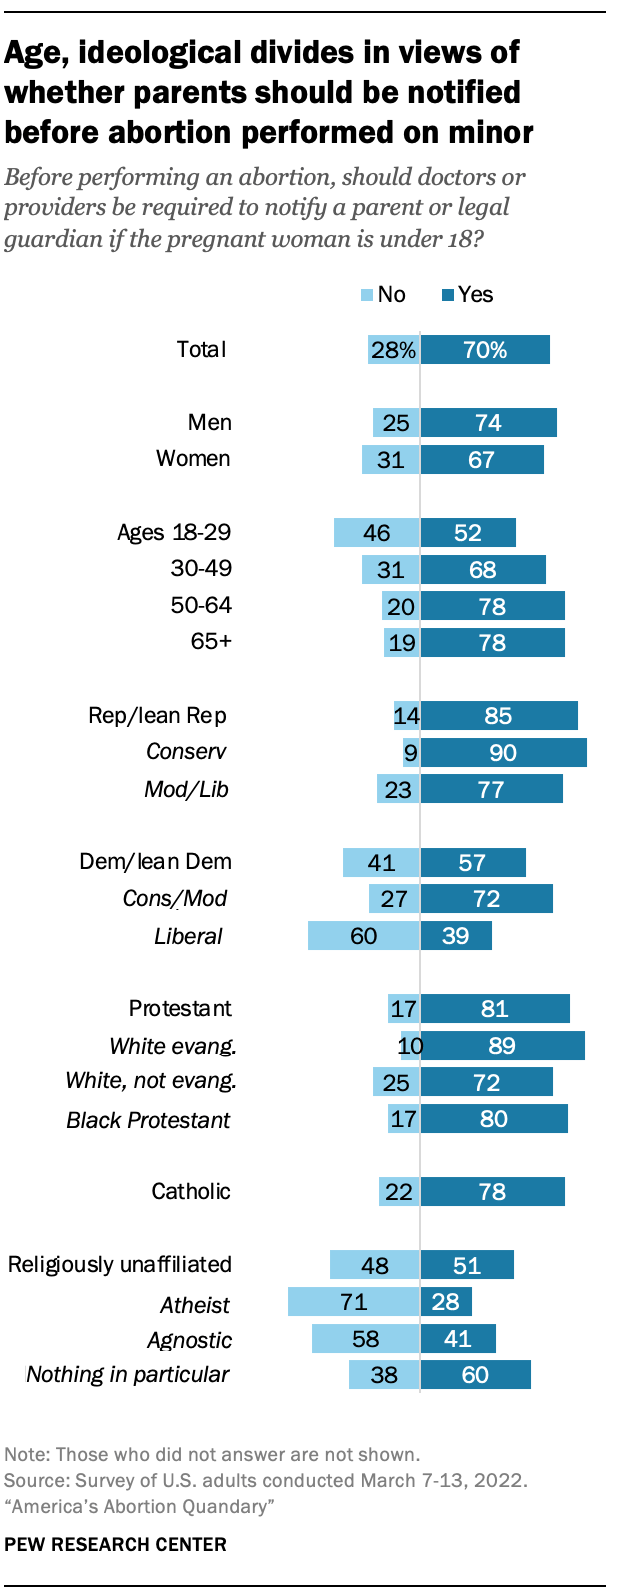 Age, ideological divides in views of whether parents should be notified before abortion performed on minor